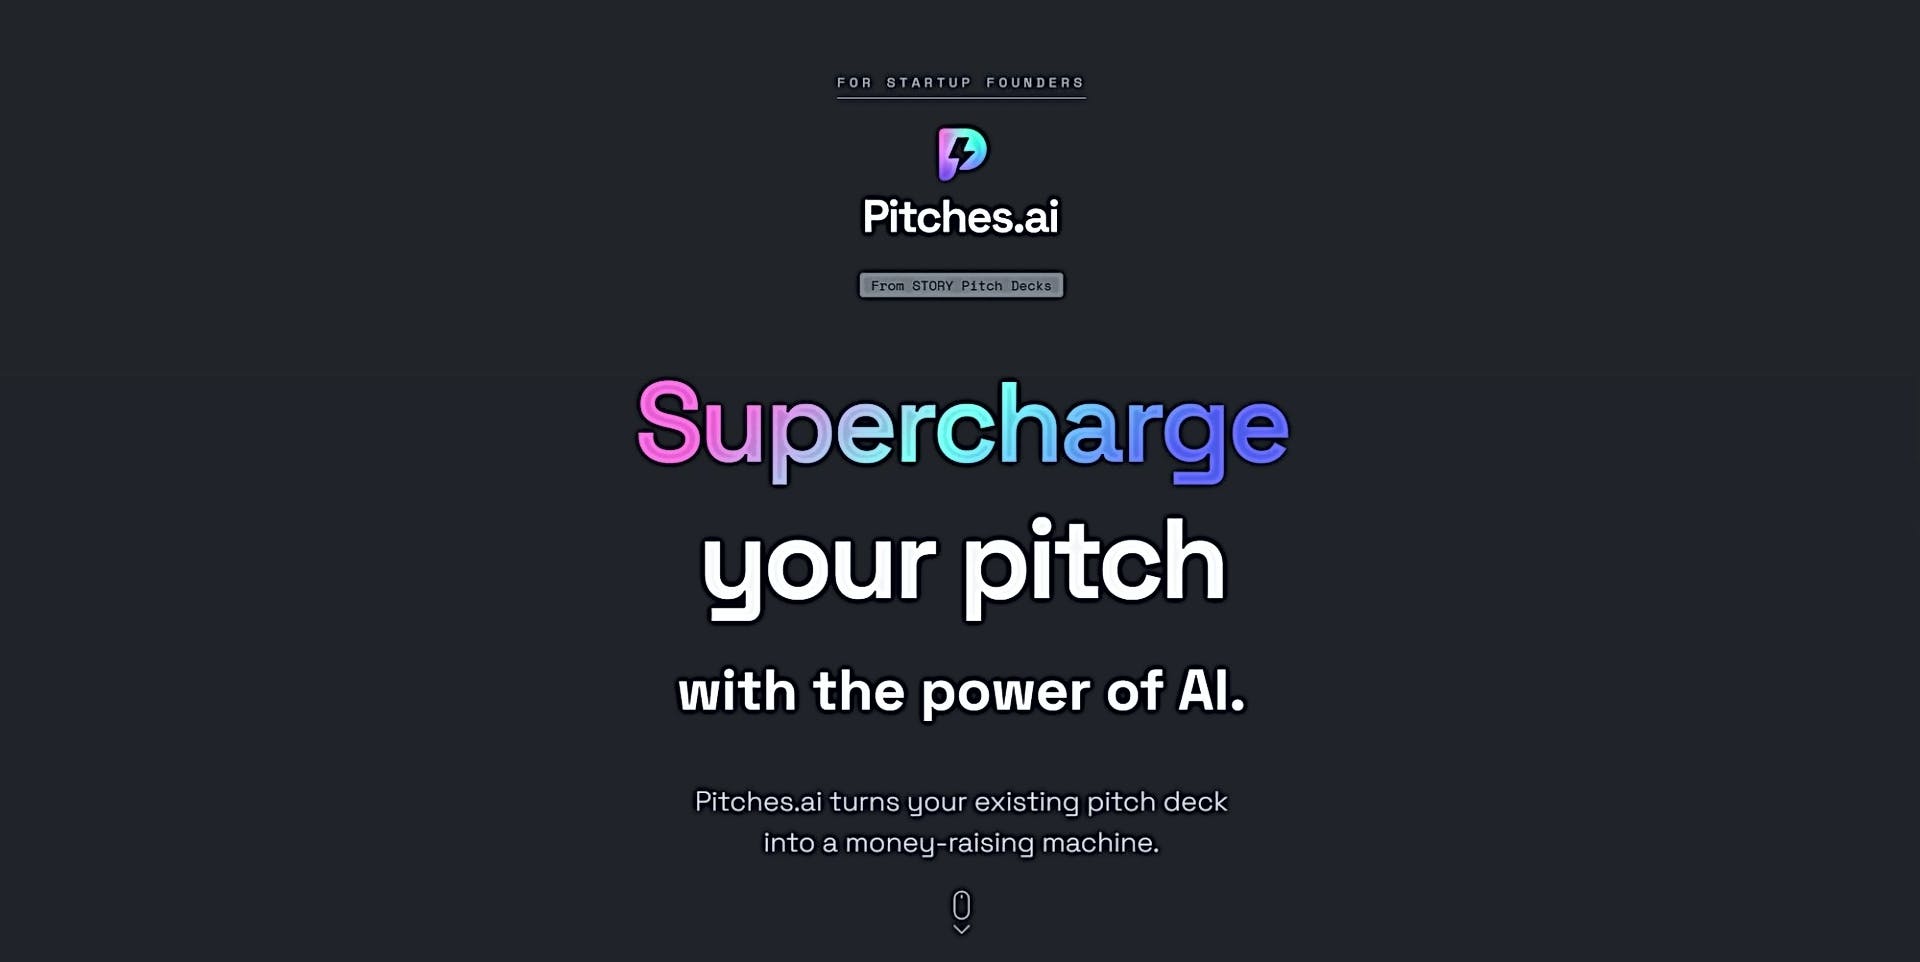 Pitches.ai featured